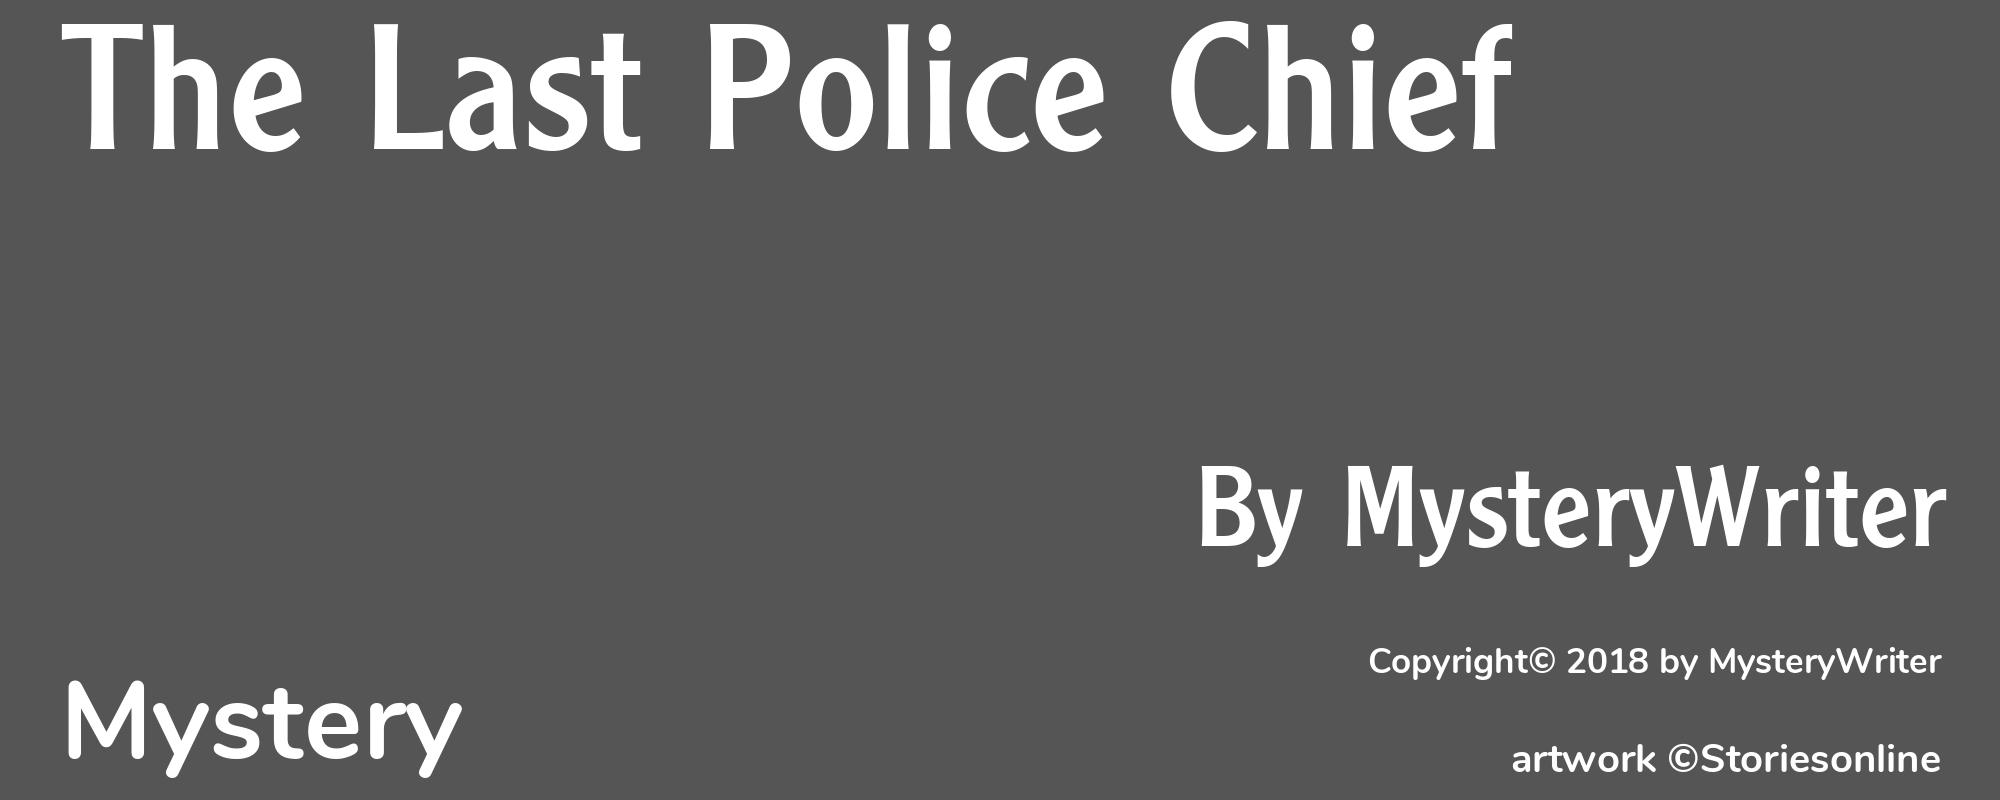 The Last Police Chief - Cover